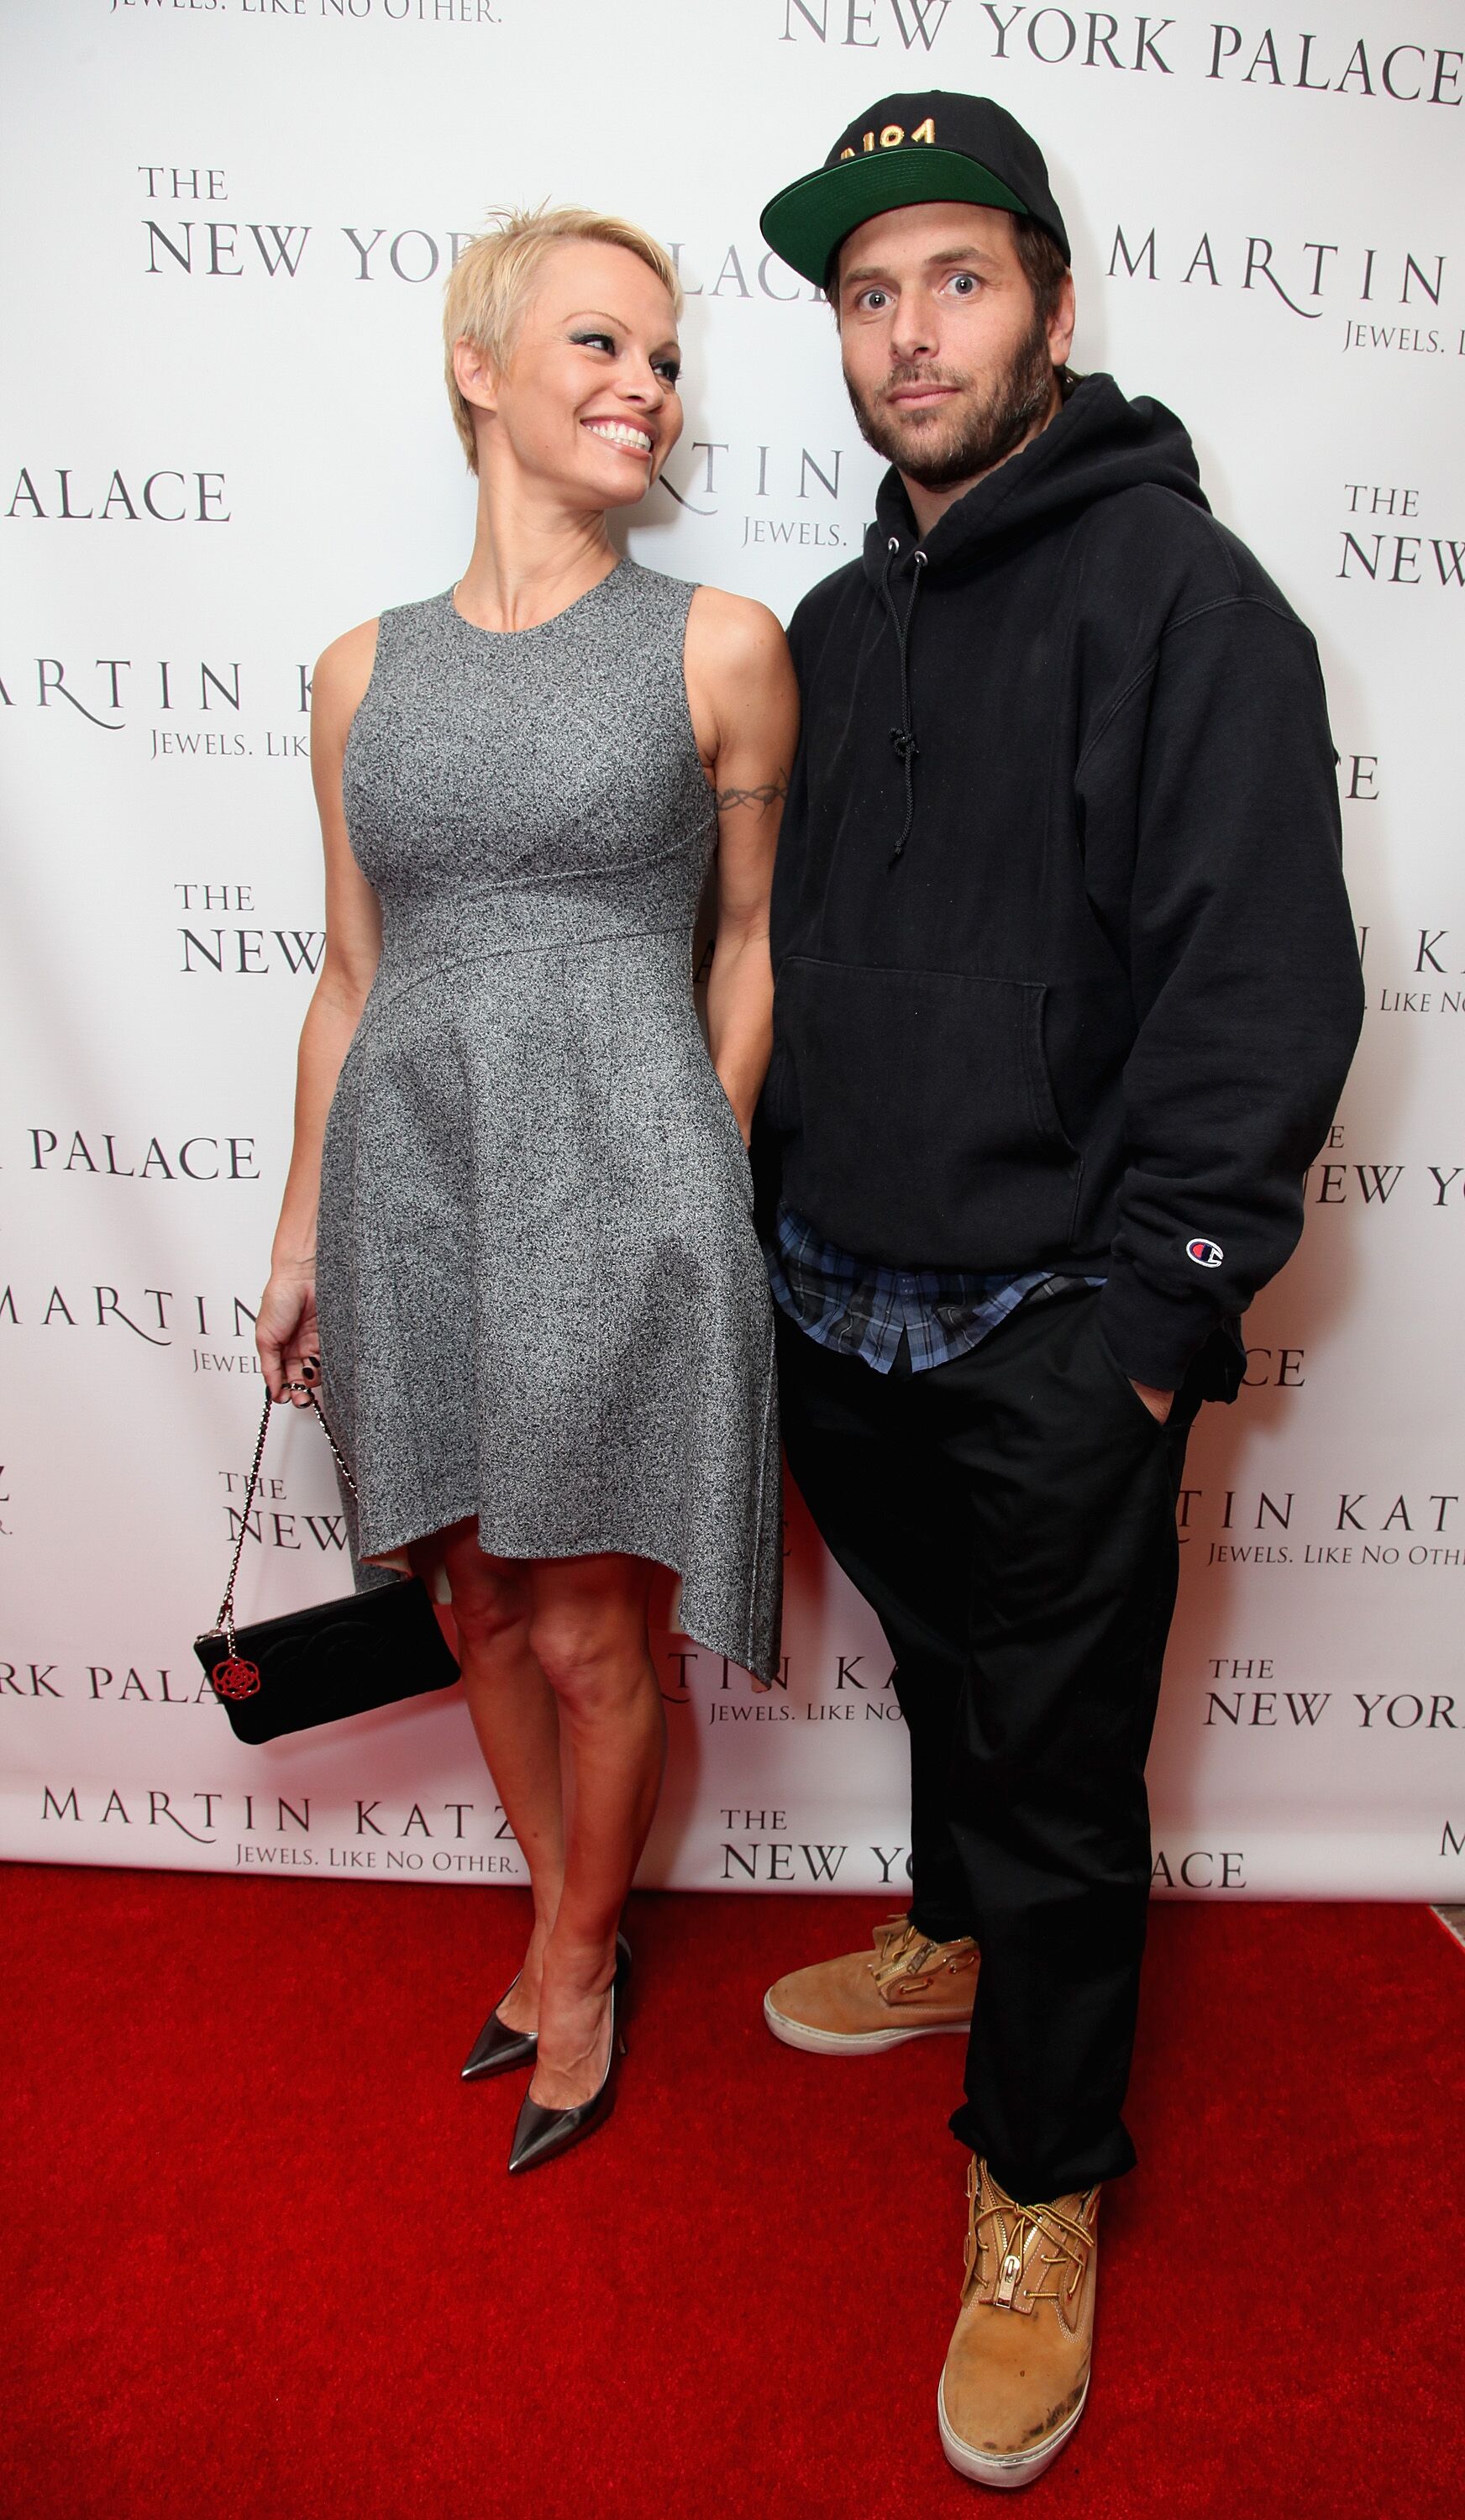 Pamela Anderson and Rick Salomon attend The Martin Katz Jewel Suite. | Source: Getty Images